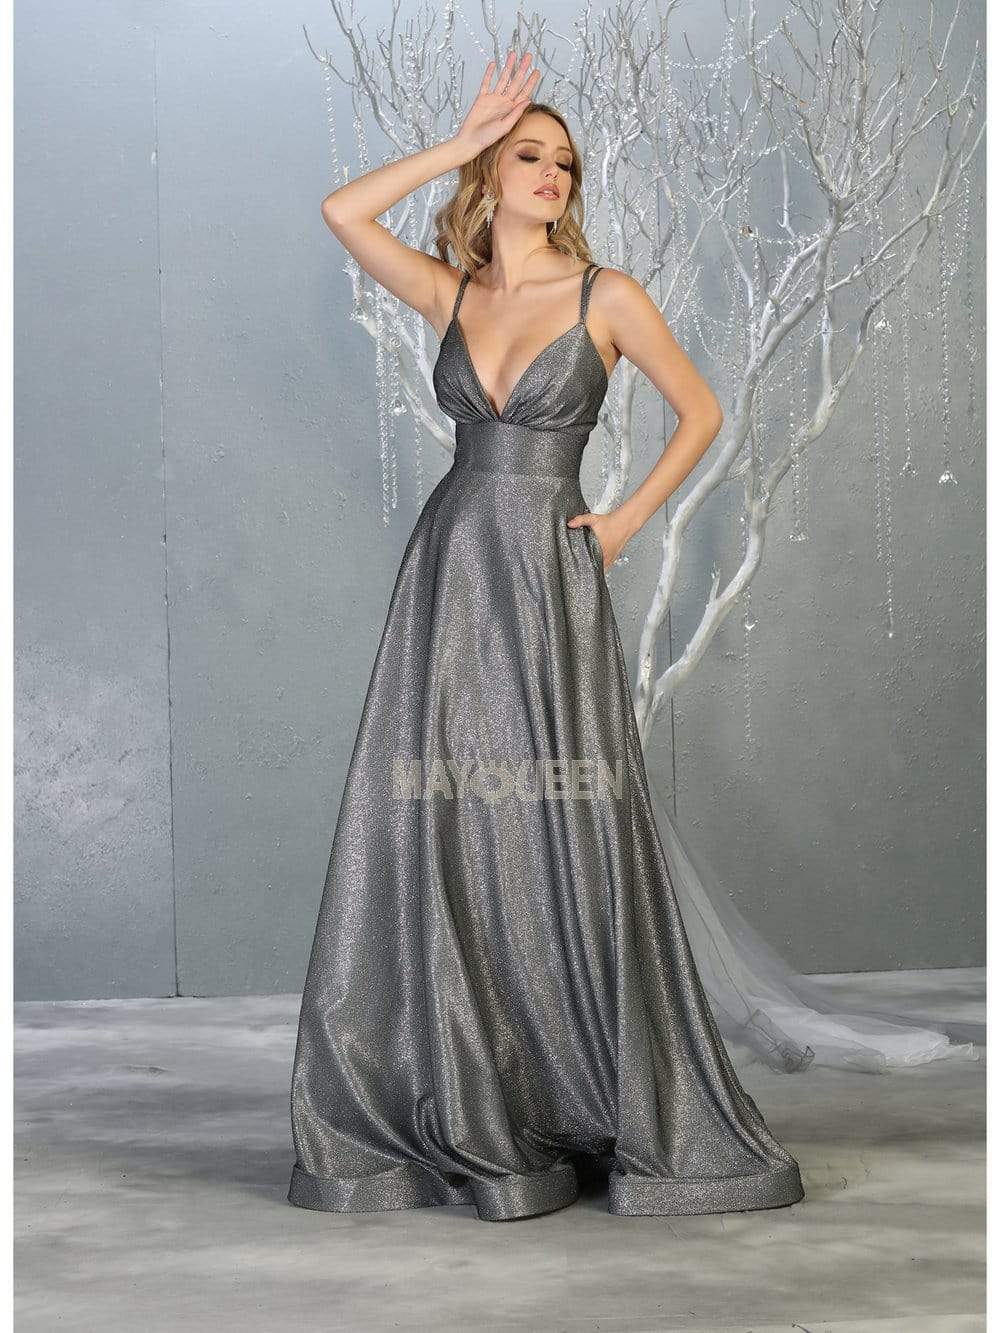 May Queen - MQ1756 Ruched Empire Glitter A-Line Dress Prom Dresses 4 / Charcoal Gray